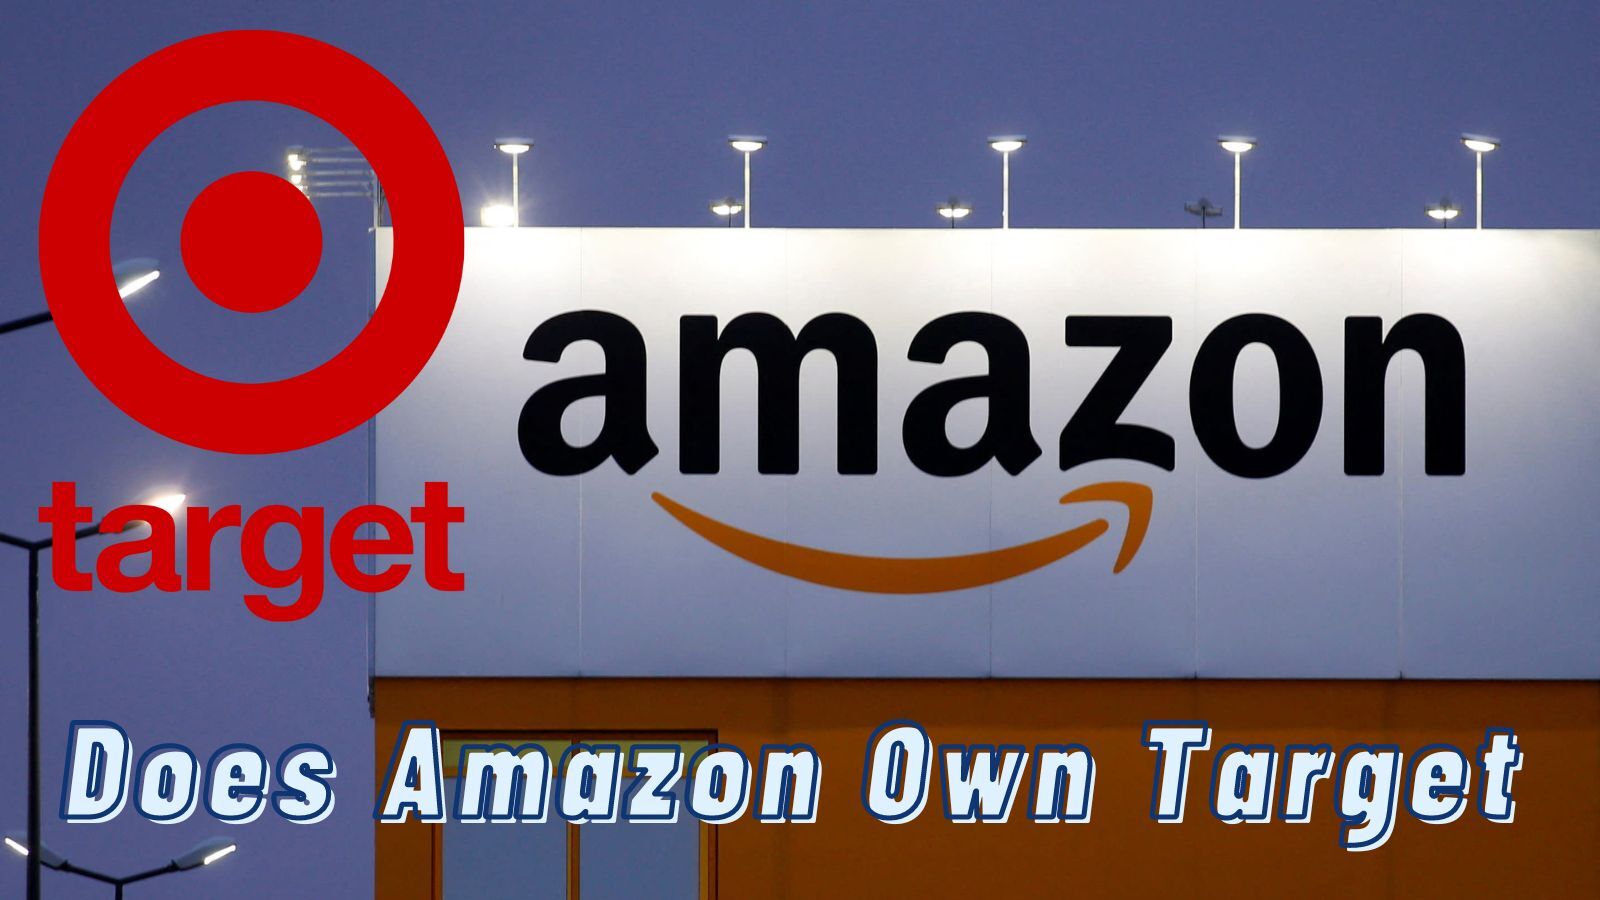 Does Amazon Own Target? (Something You Might Be Interested In)